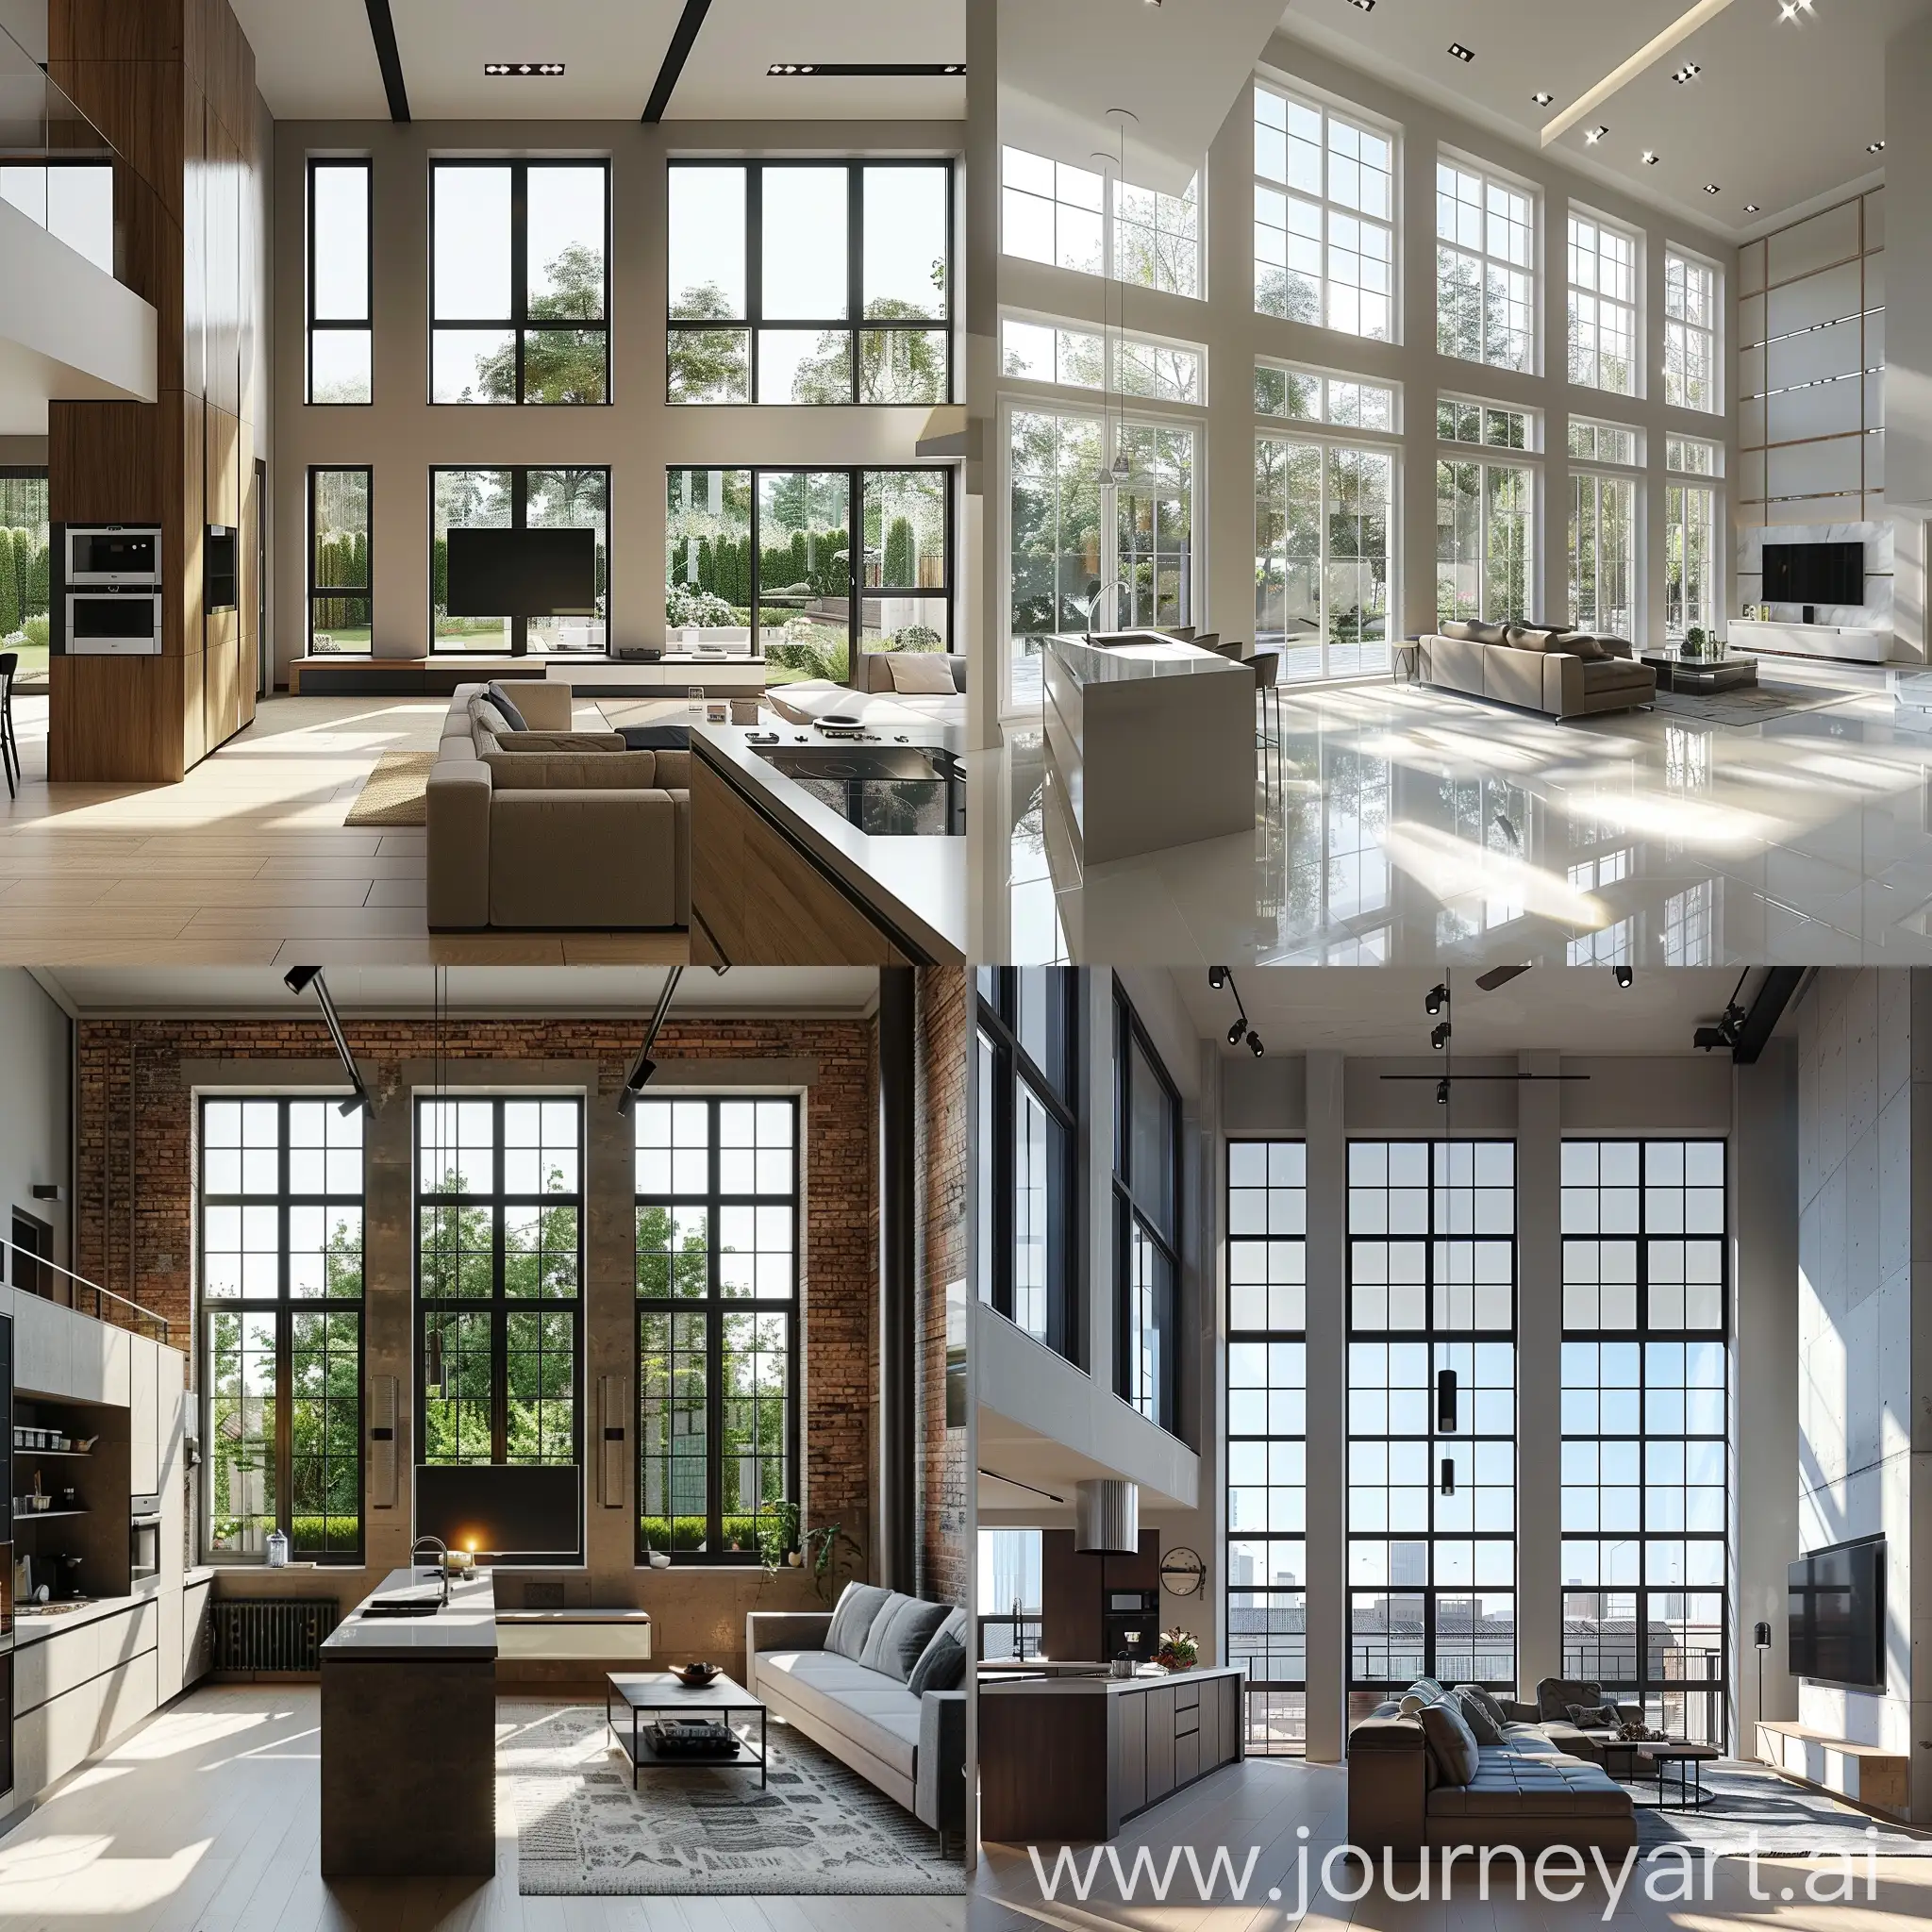 Contemporary-KitchenLiving-Room-Interior-Design-with-Spacious-Layout-and-Abundant-Natural-Light